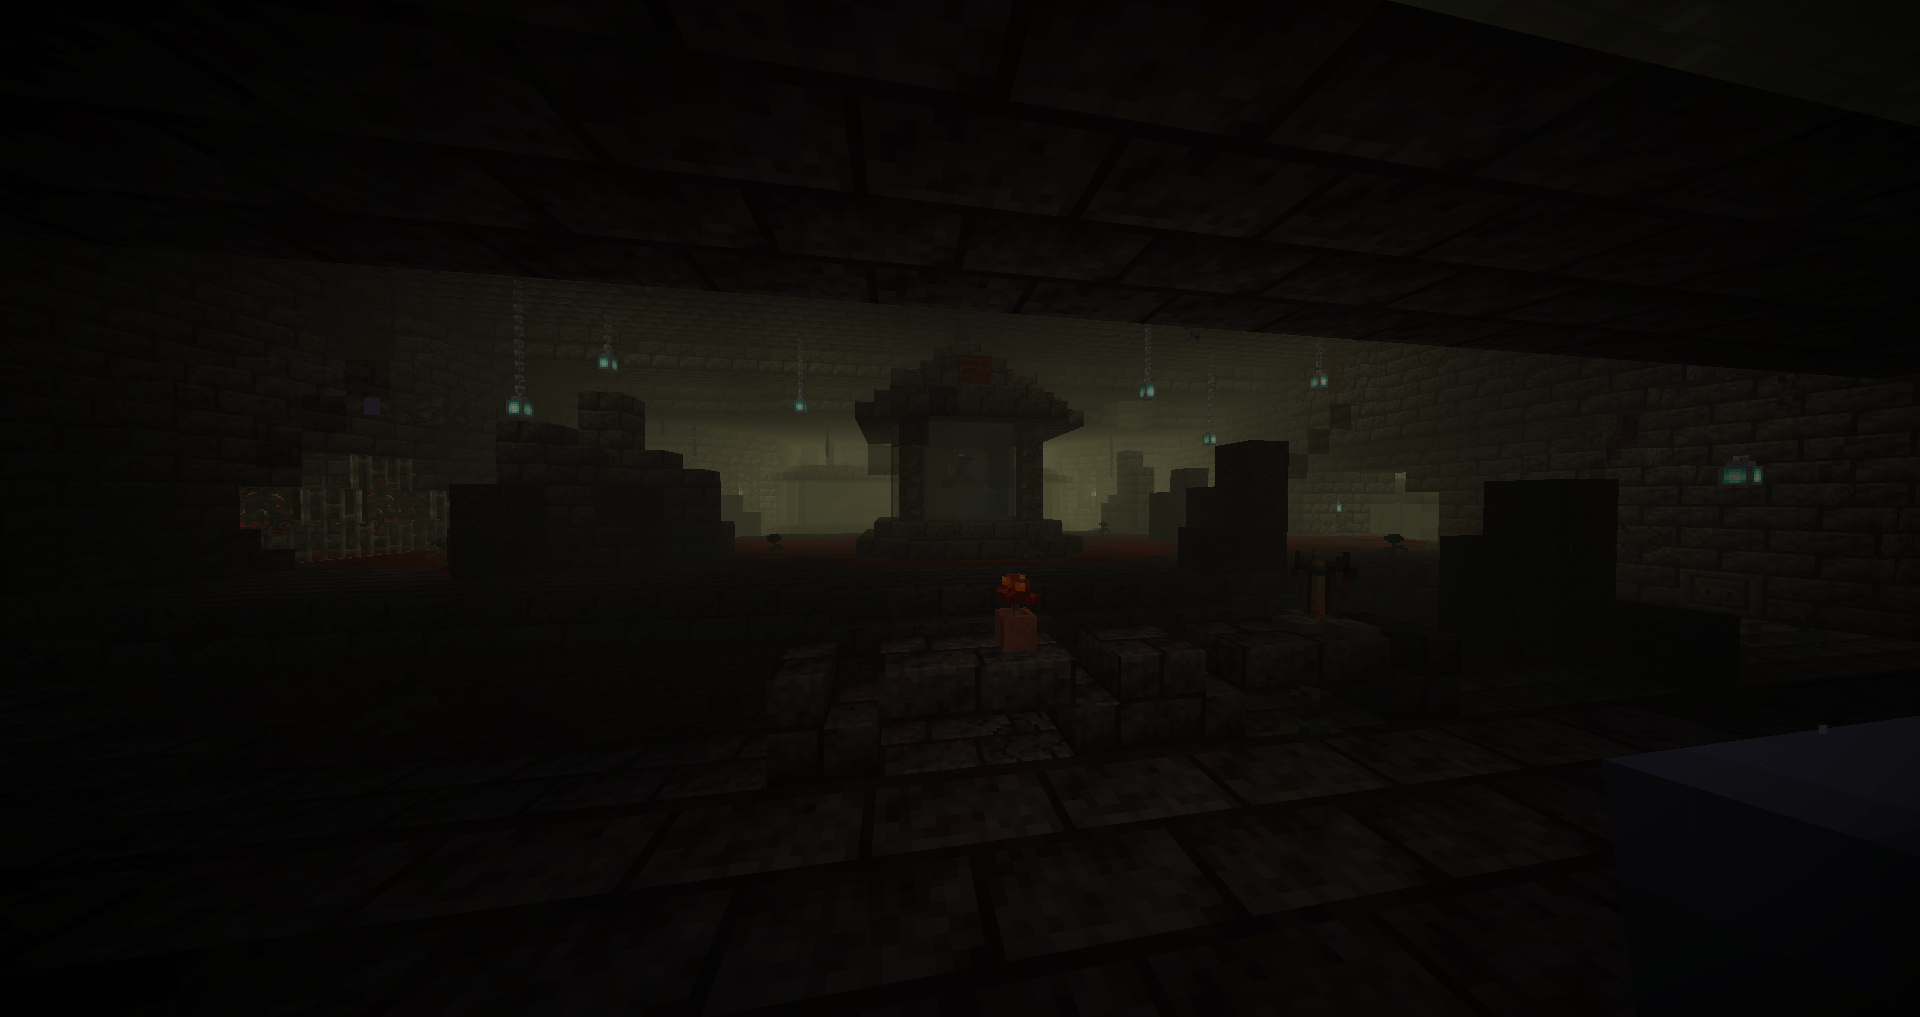 Unduh The Ancient Abyss 1.0 untuk Minecraft 1.16.4